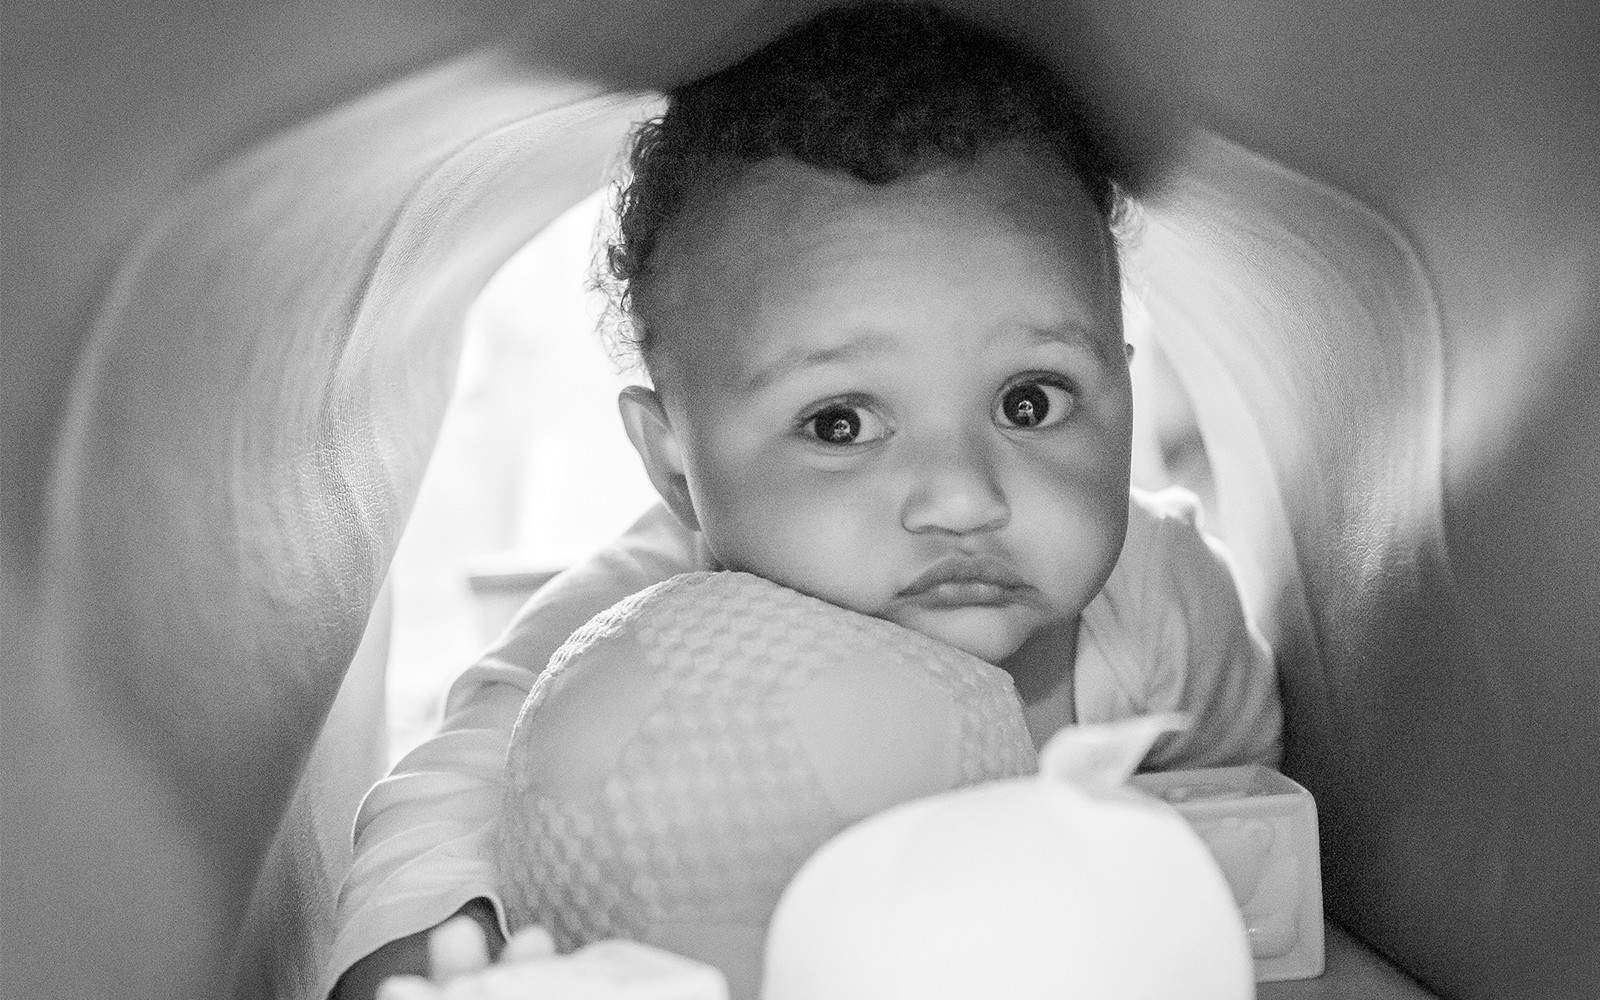 Black and white image of baby with somber face